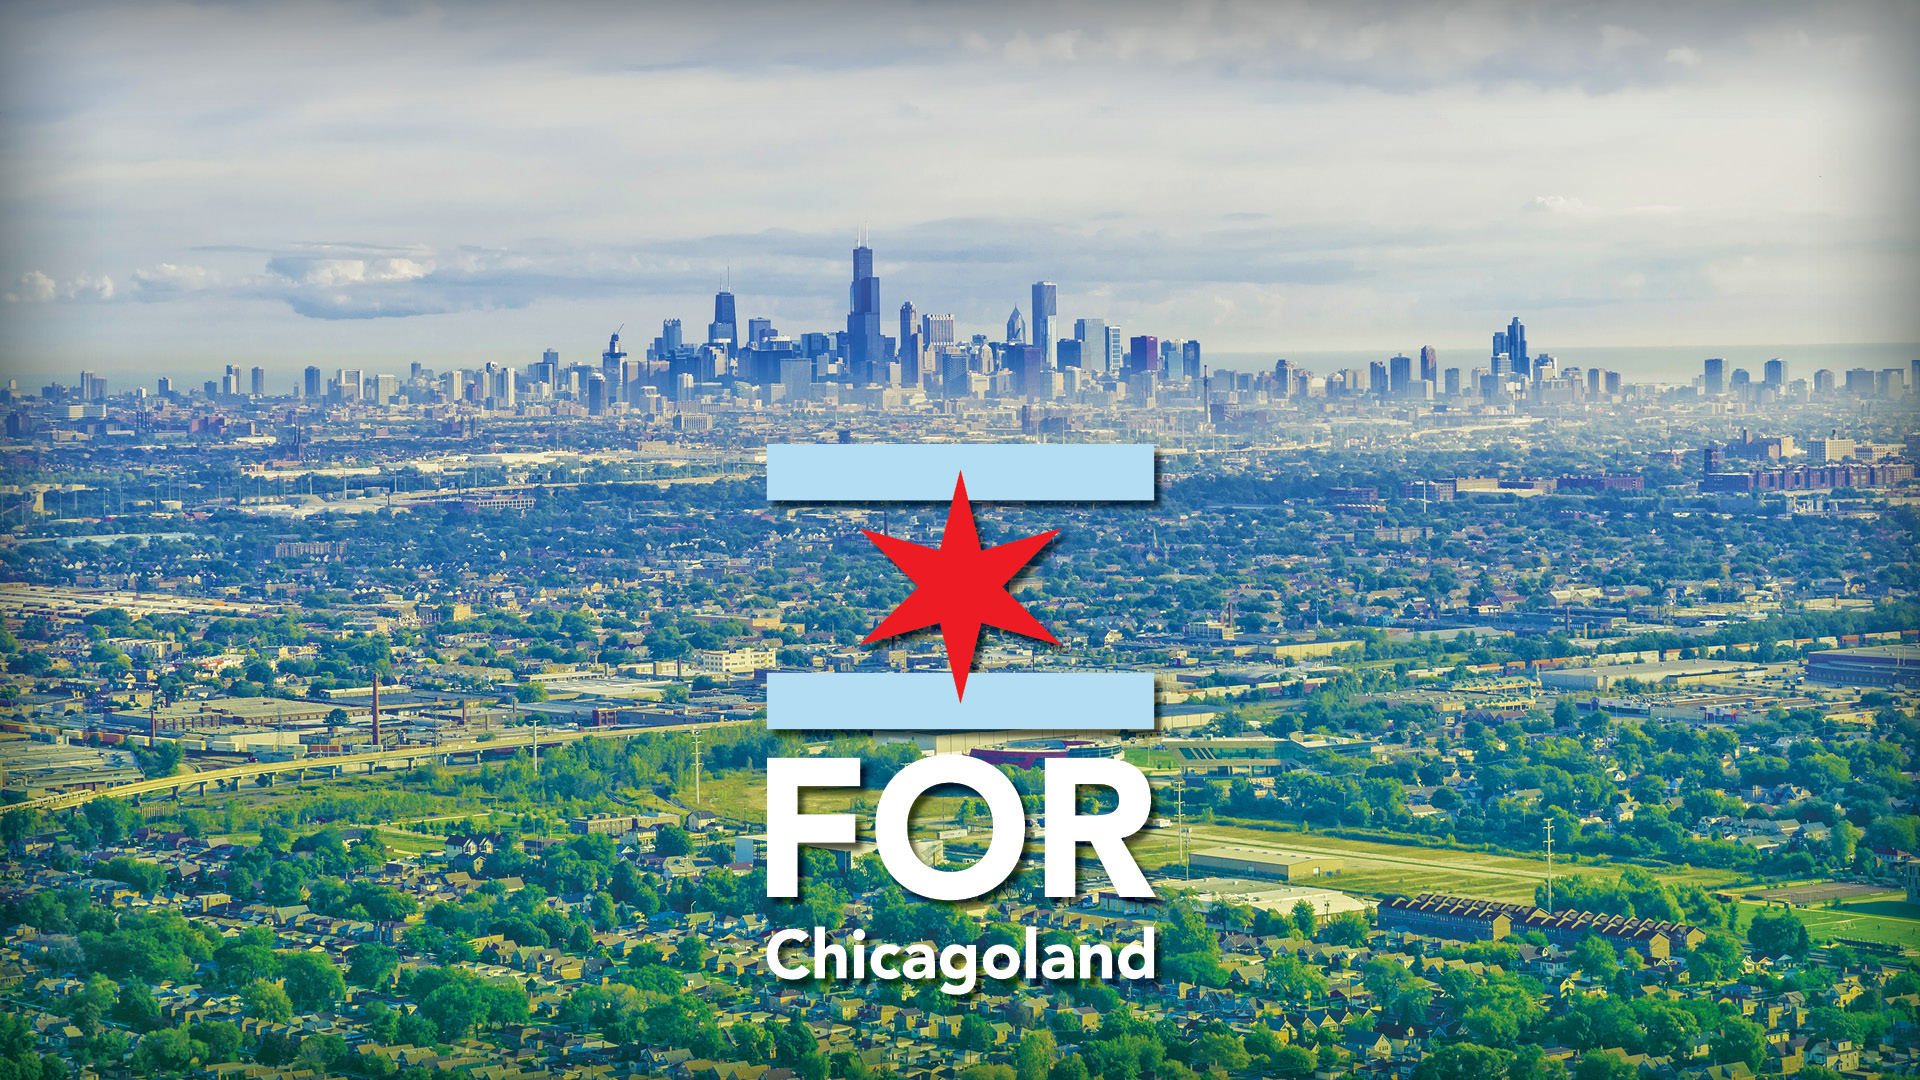 For Chicagoland | First Saturday Serve
Breakthrough
Saturday, March 4
 
